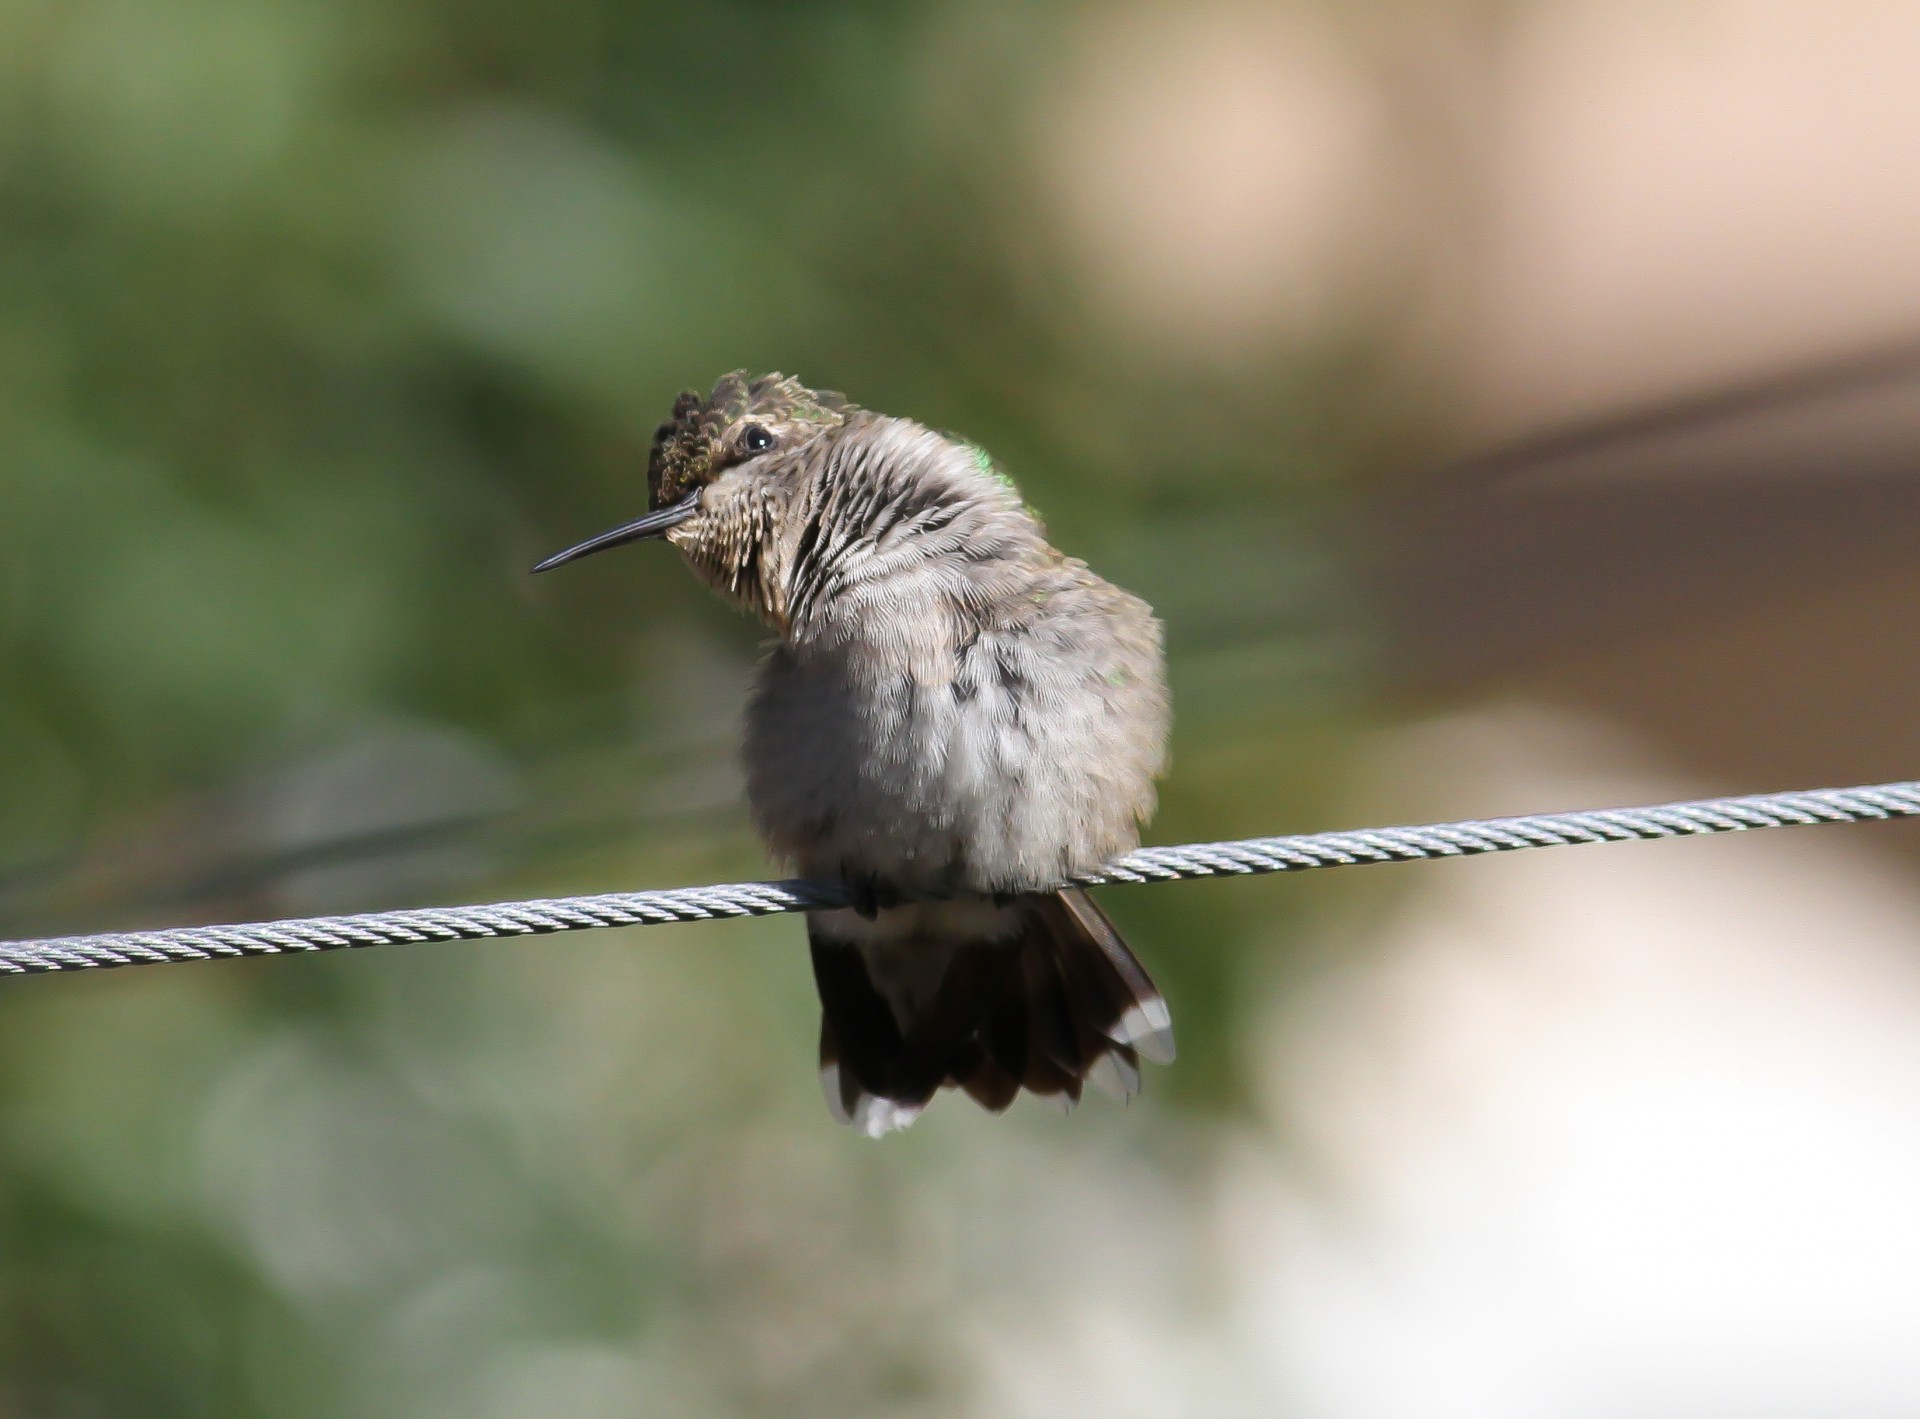 Tired hummingbird snoozing on a wire